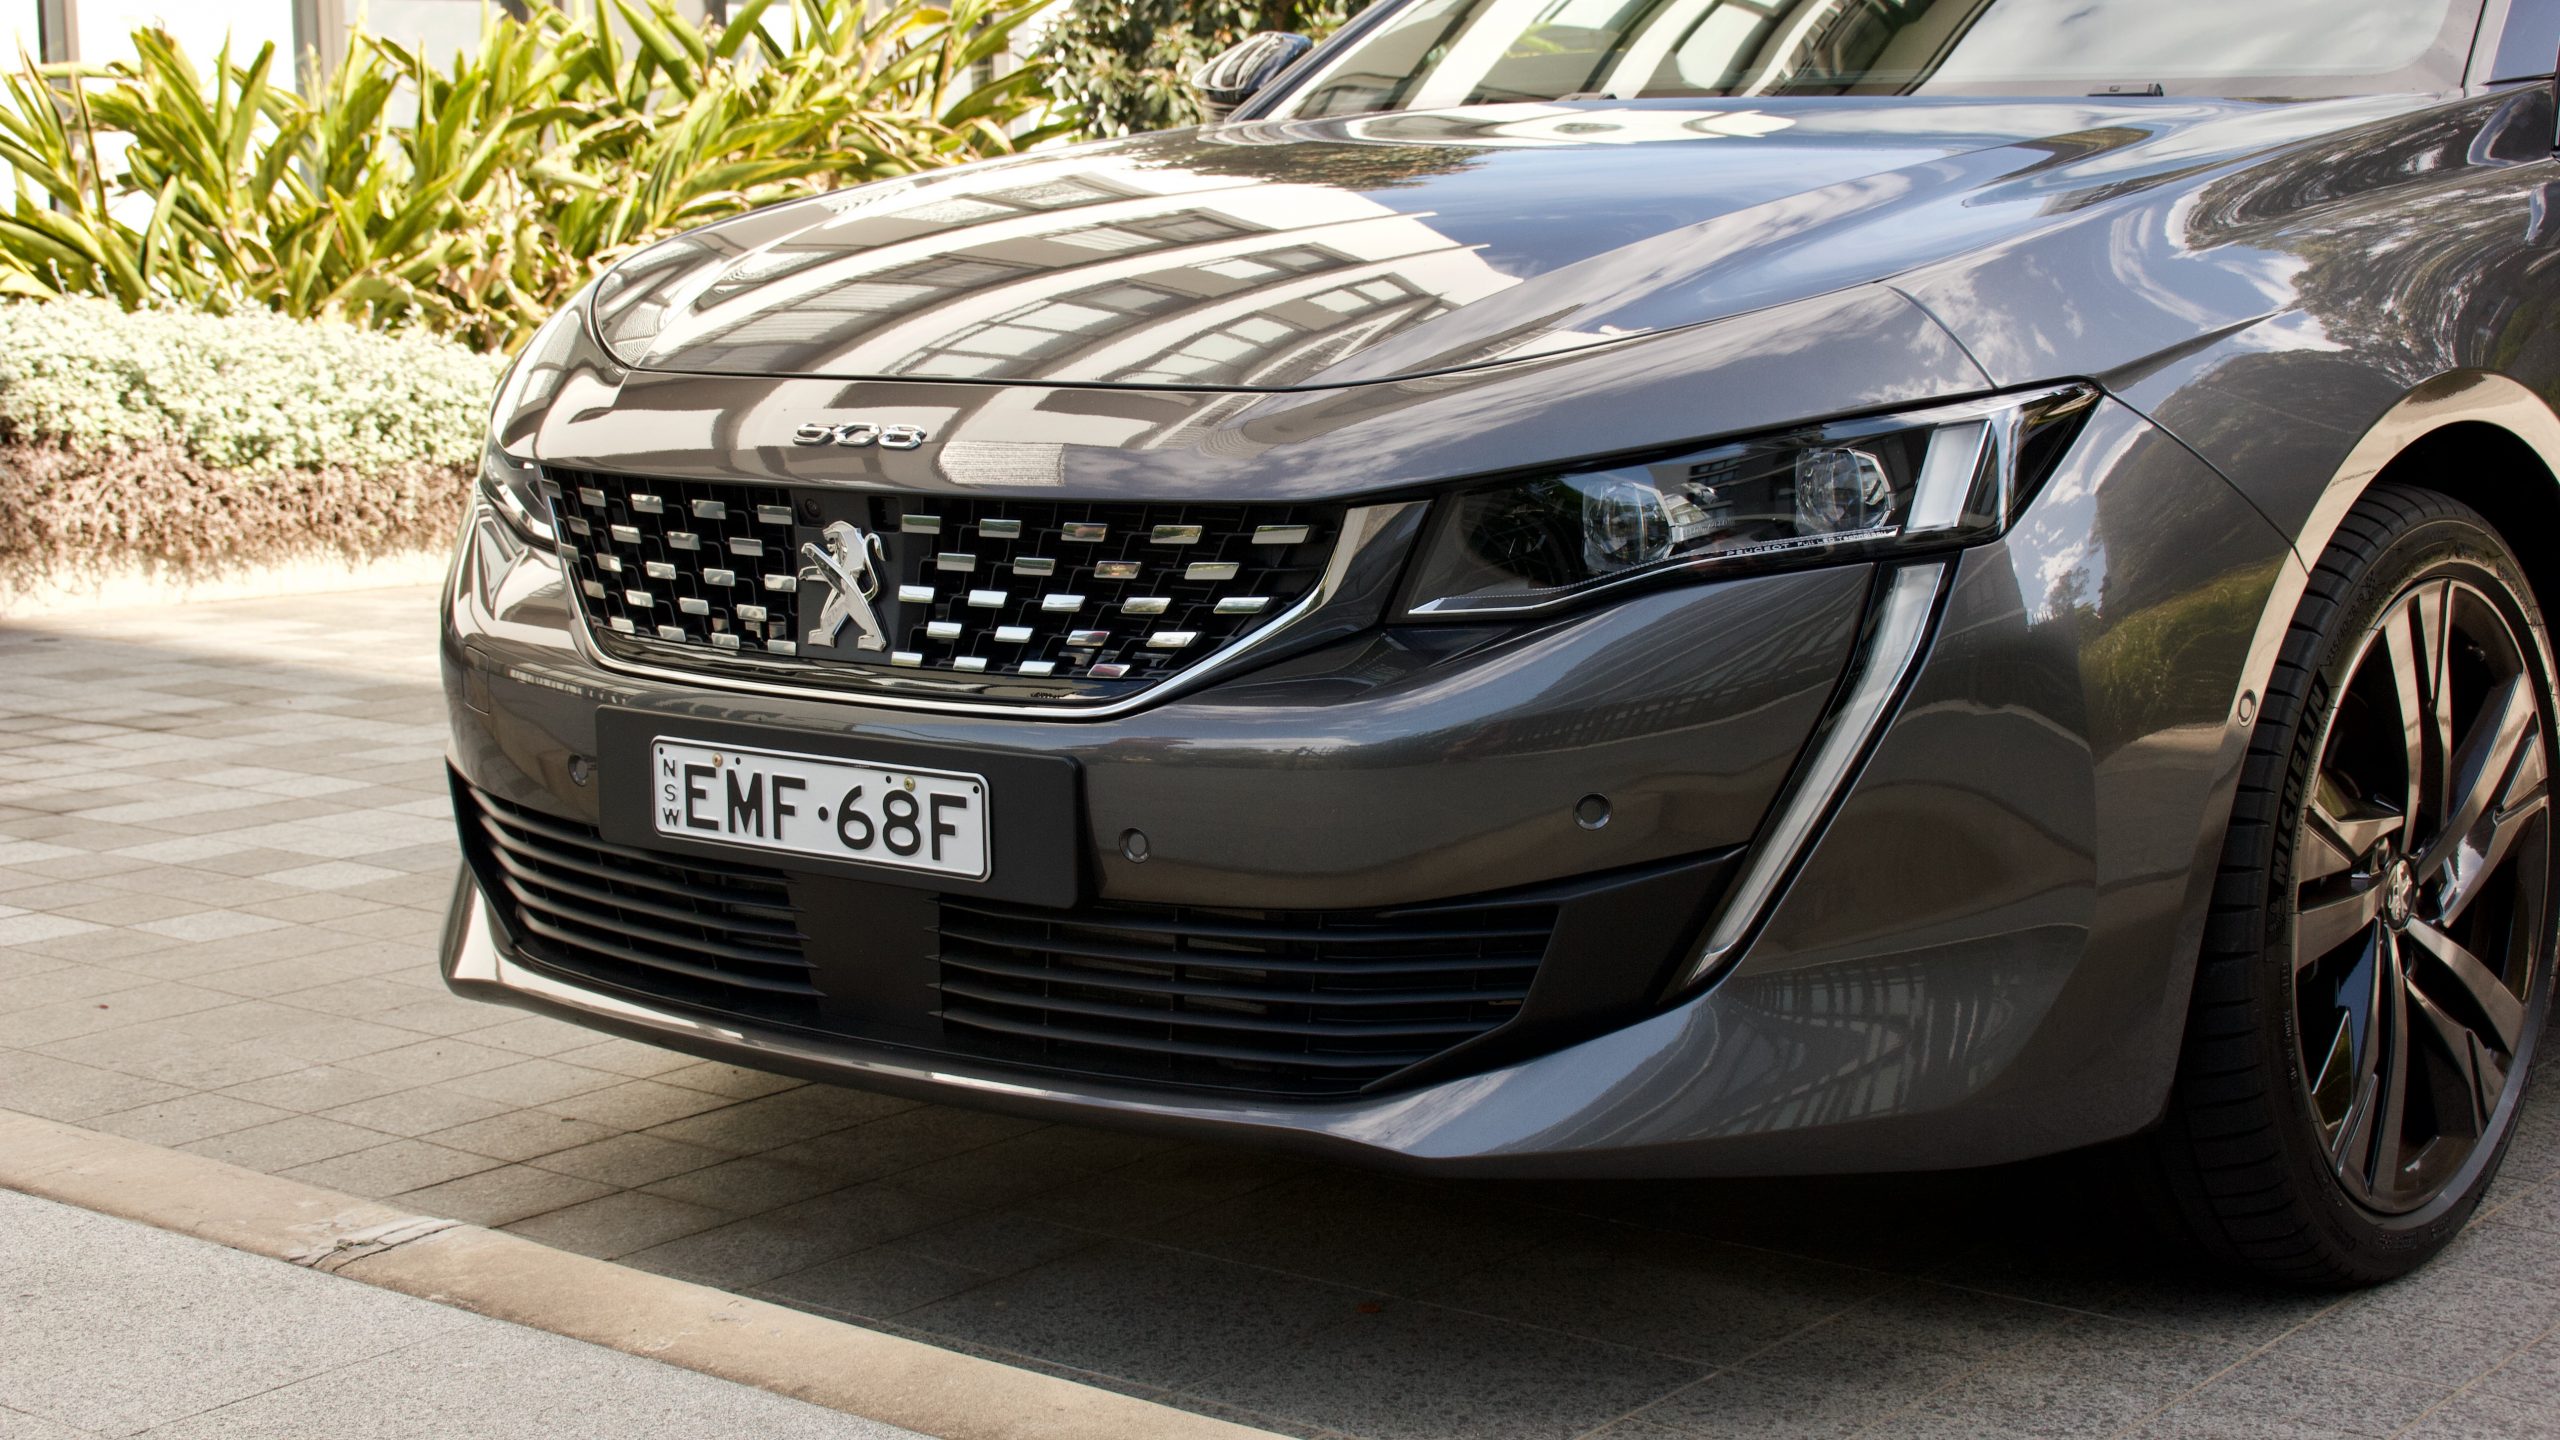 2021 Peugeot 508 GT Fastback 1.6 Turbo Review